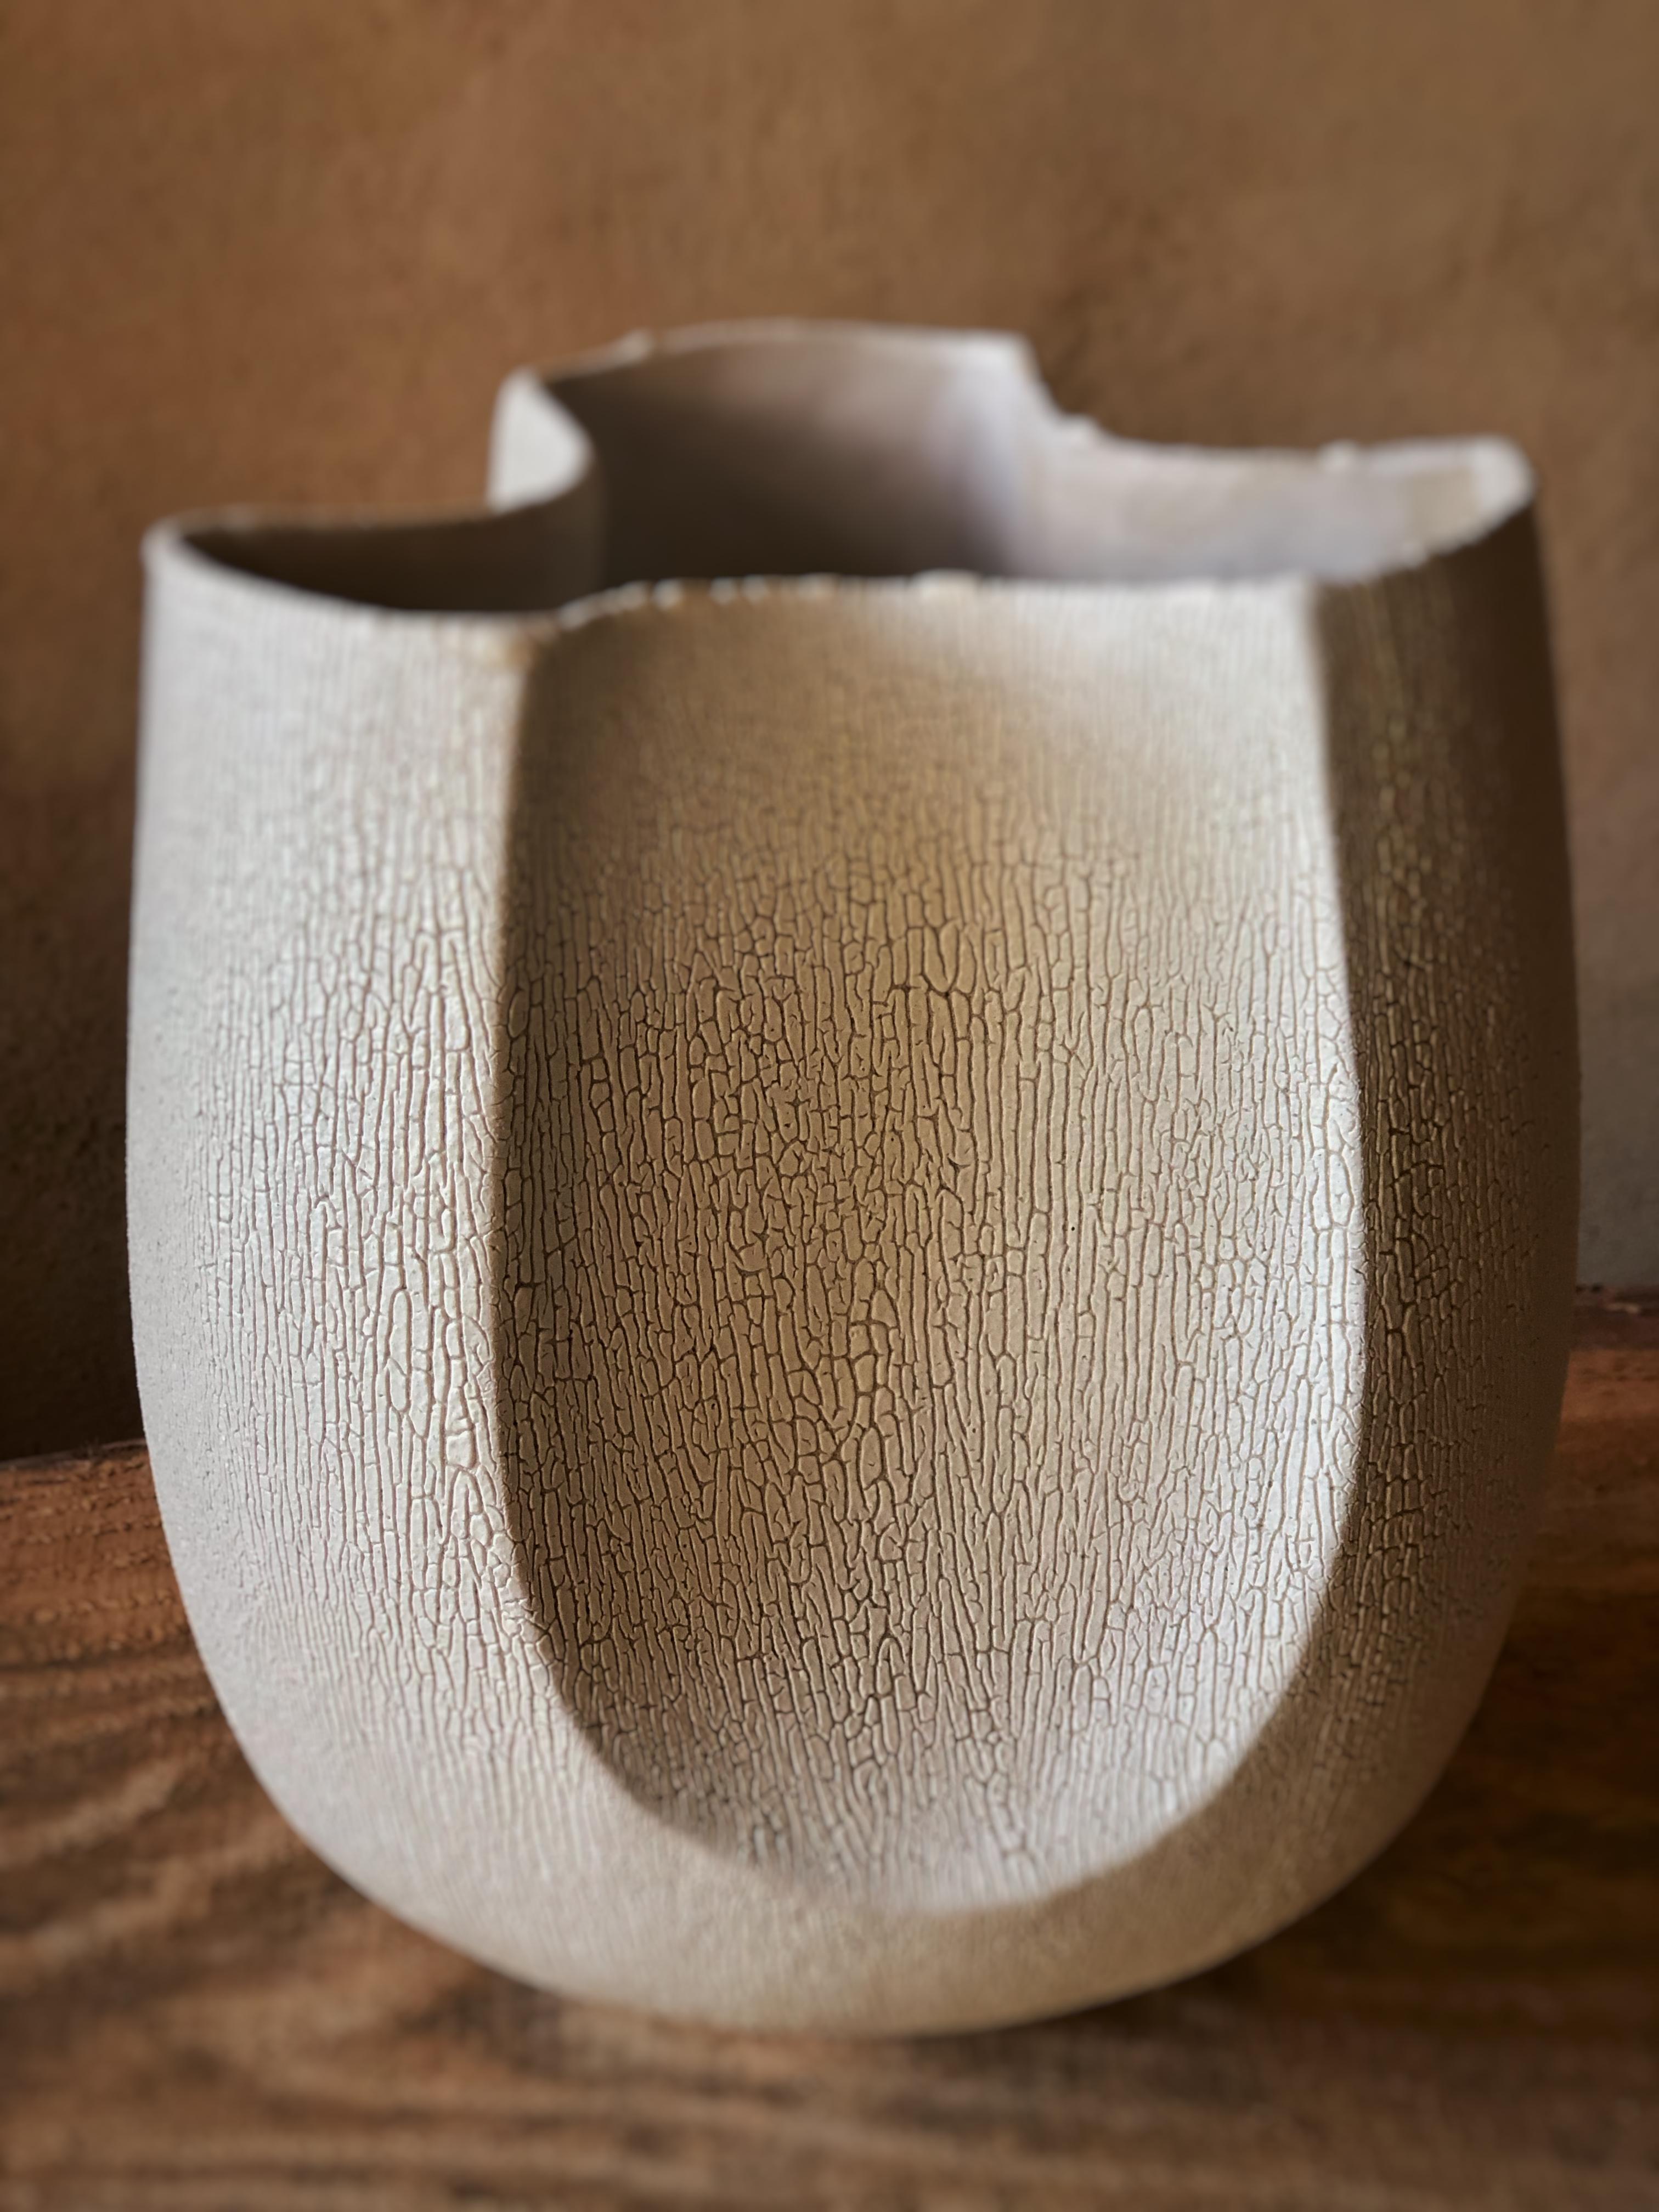 3 Facetted Vase With White Crackle Glaze by Sophie Vaidie
One Of A Kind.
Dimensions: Ø 18 x H 23 cm. 
Materials: Stoneware with white crackle glaze.

In the beginning, there was a need to make, with the hands, the touch, the senses. Then came the